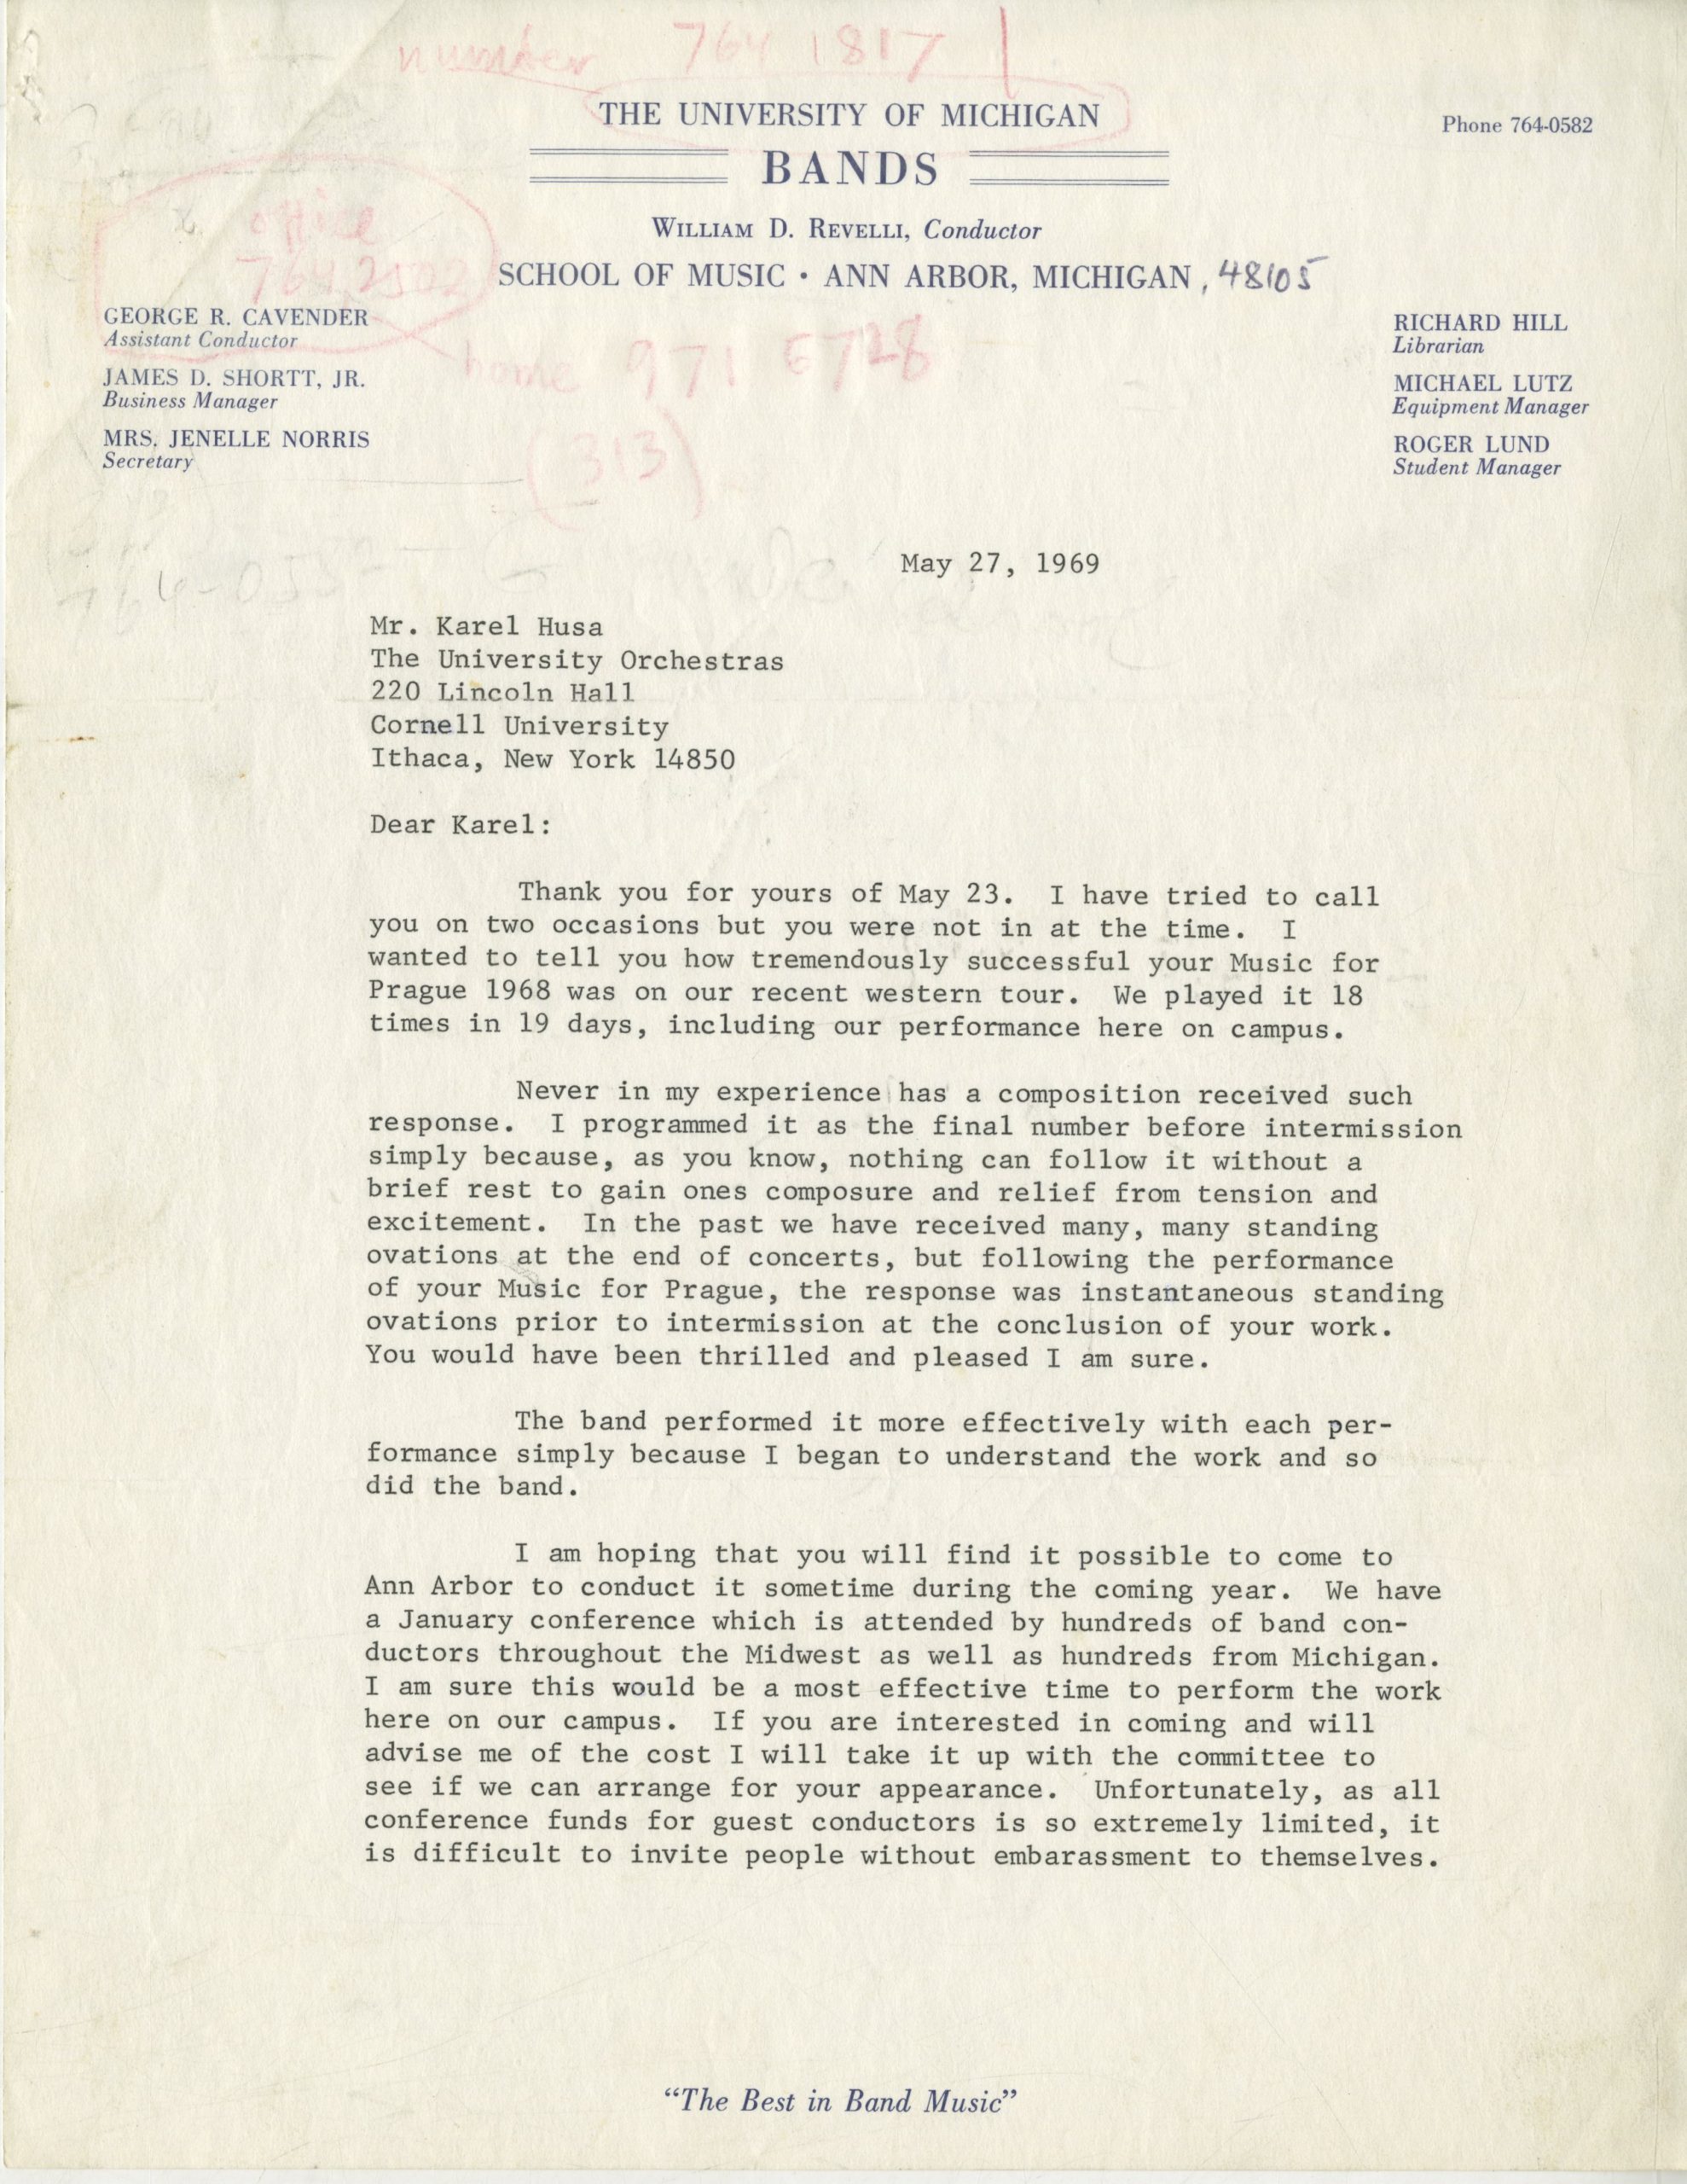 May 1969 letter from William Revelli (page 1).